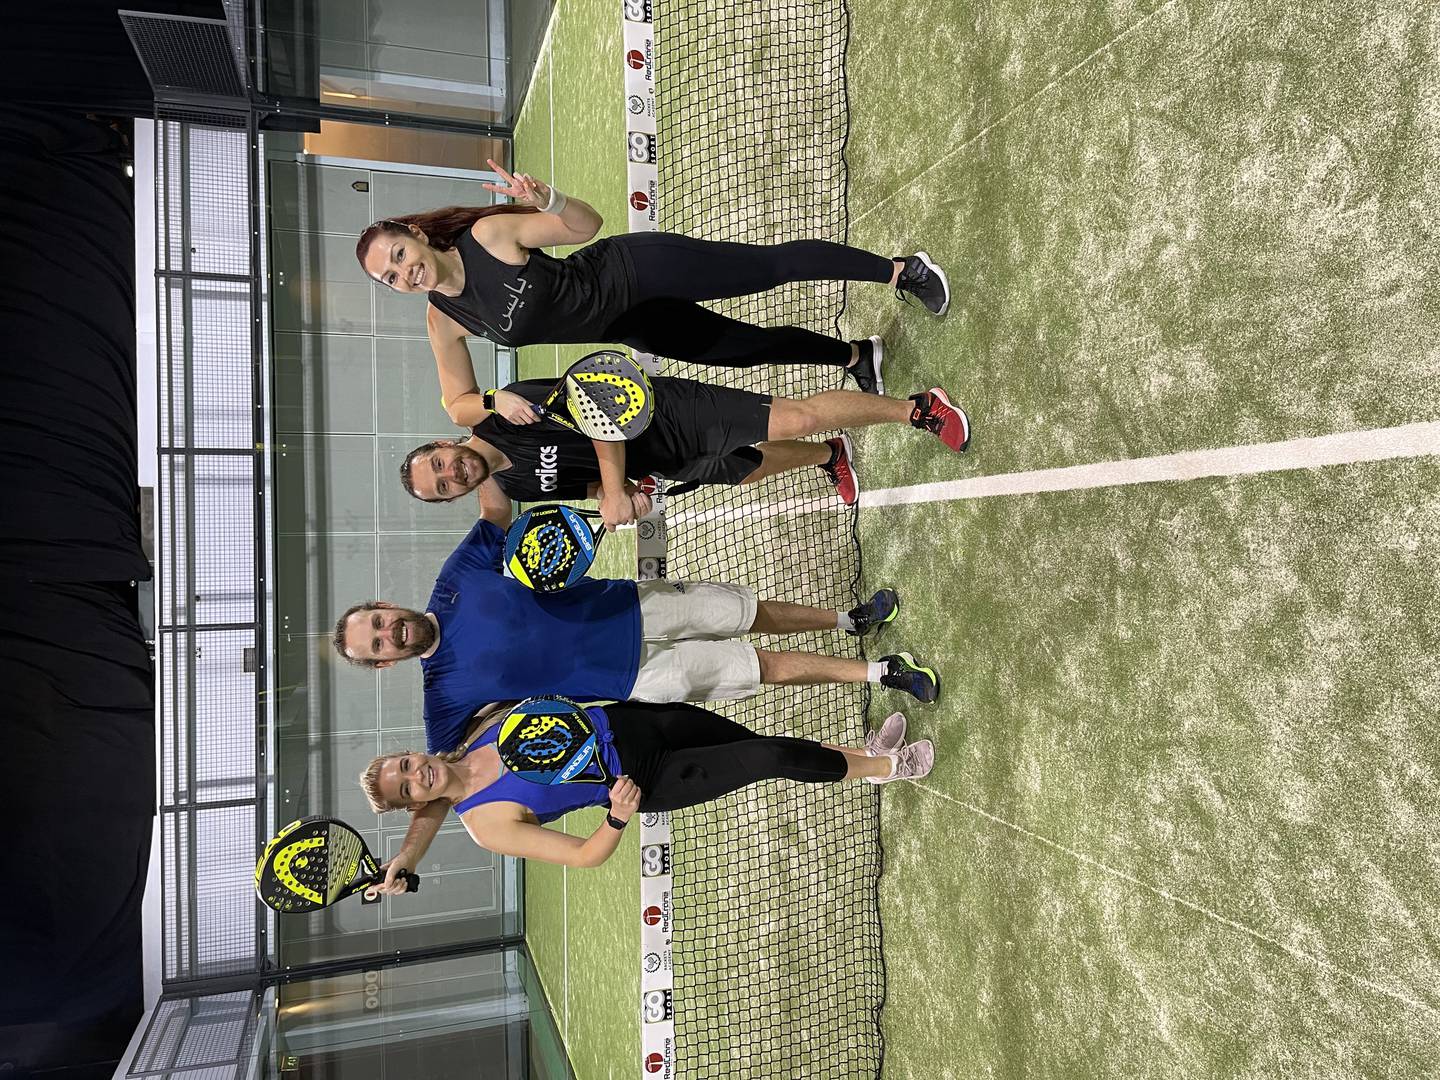 UAE TV presenter Katie Overy, right, with friends during her first padel experience. The sport is taking off in the UAE thanks to its sociability factor. Photo: Katie Overy